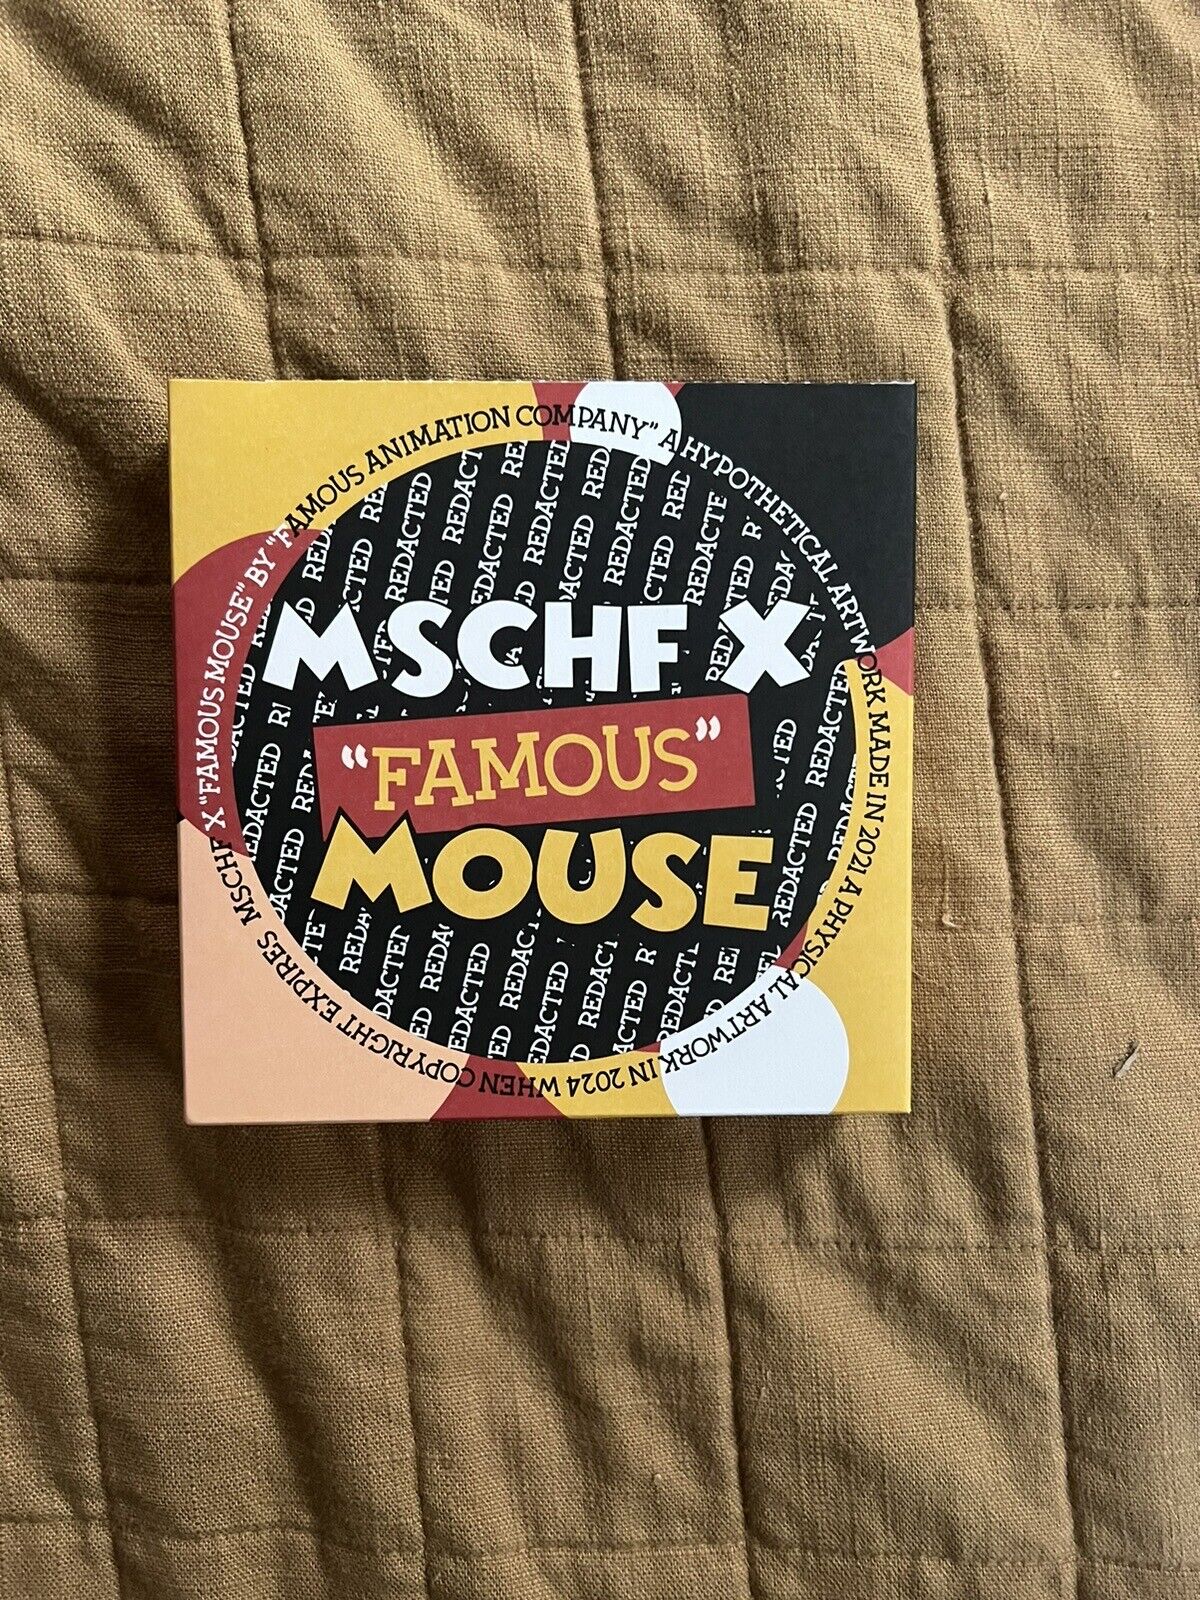 MSCHF x FAMOUS MOUSE Disney Token Collectible - Redeemable 2024 1/1000 - NEW